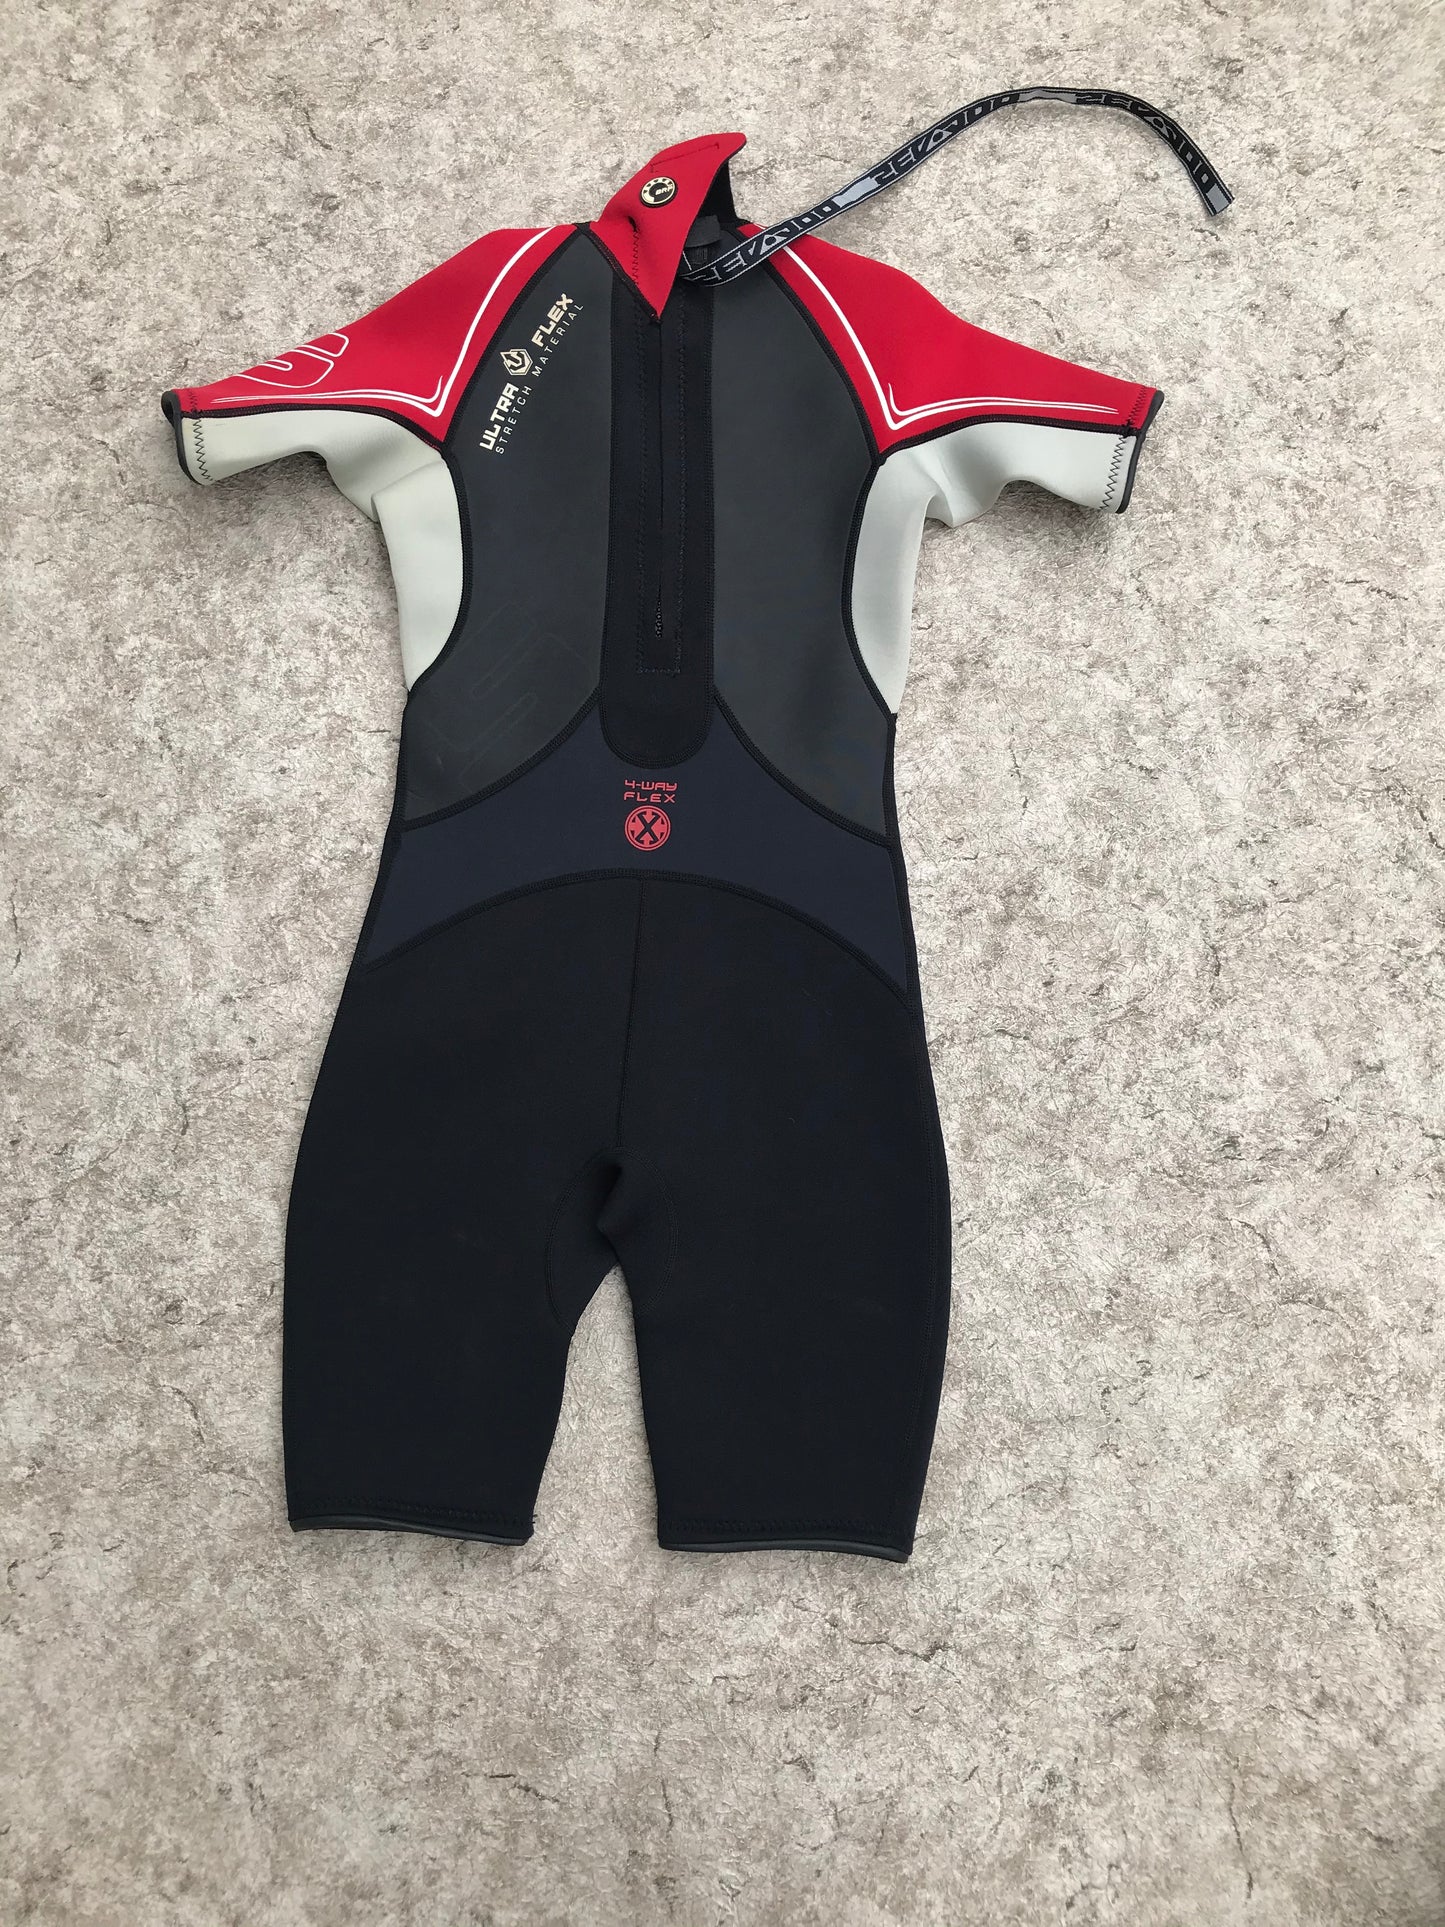 Wetsuit Child Size 10 Sea Doo 2-3 MM Red Black New Demo Model